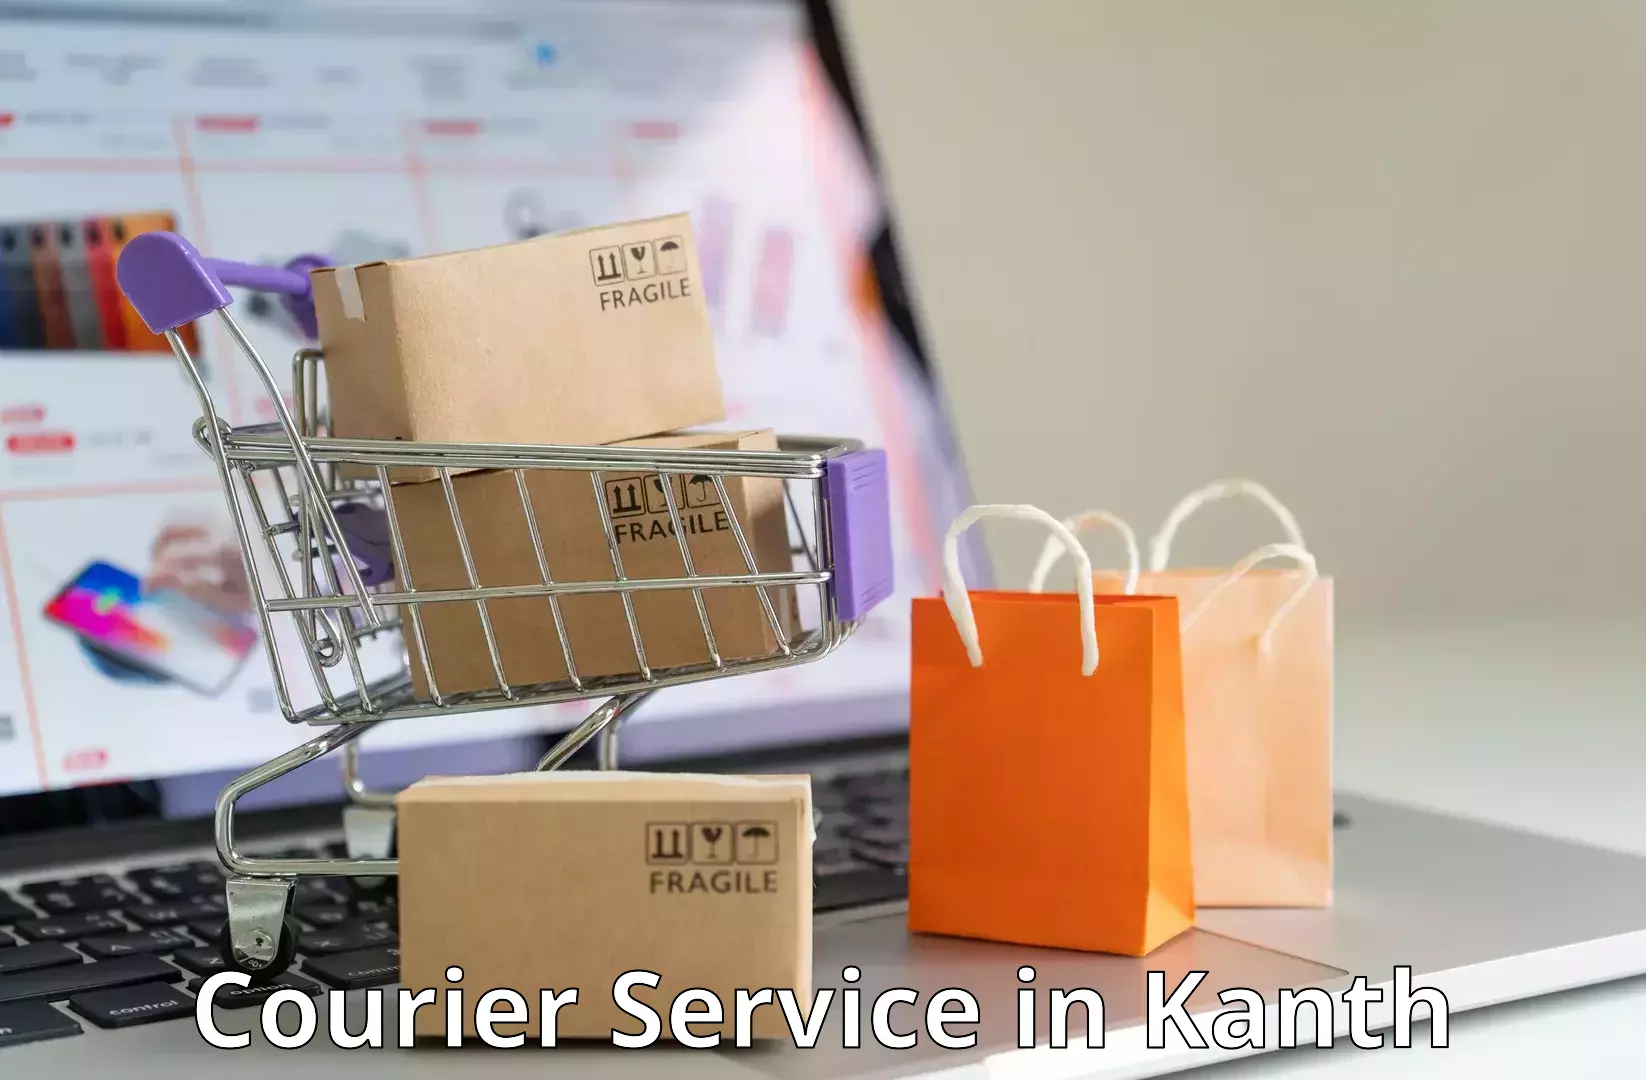 Seamless shipping experience in Kanth